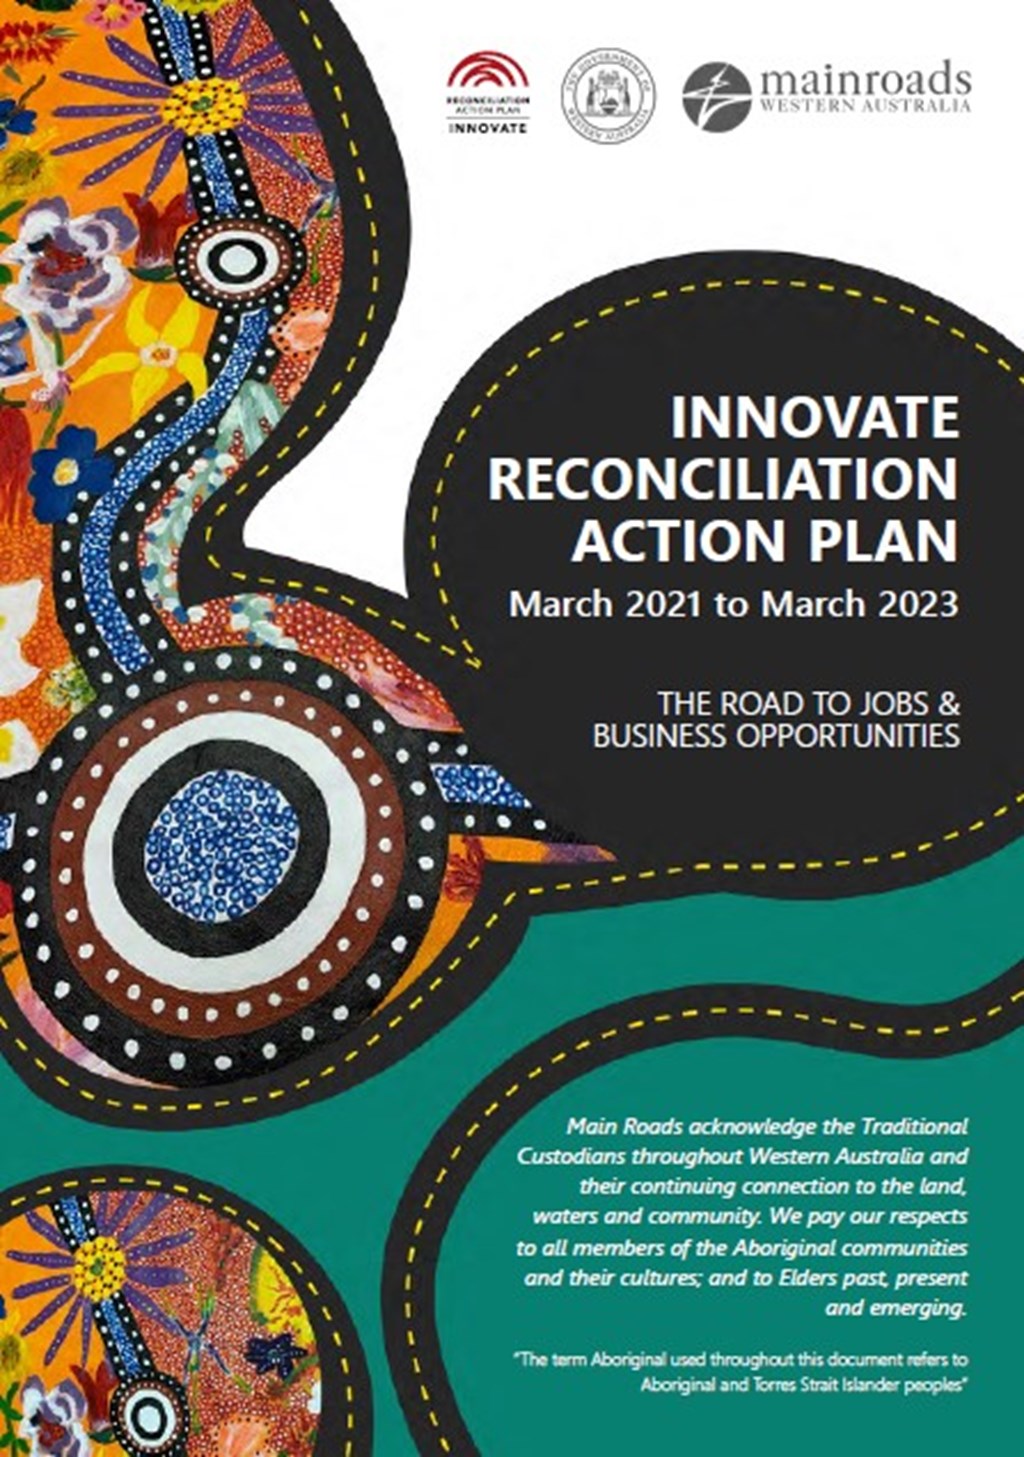 Innovate Reconciliation Action Plan brochure